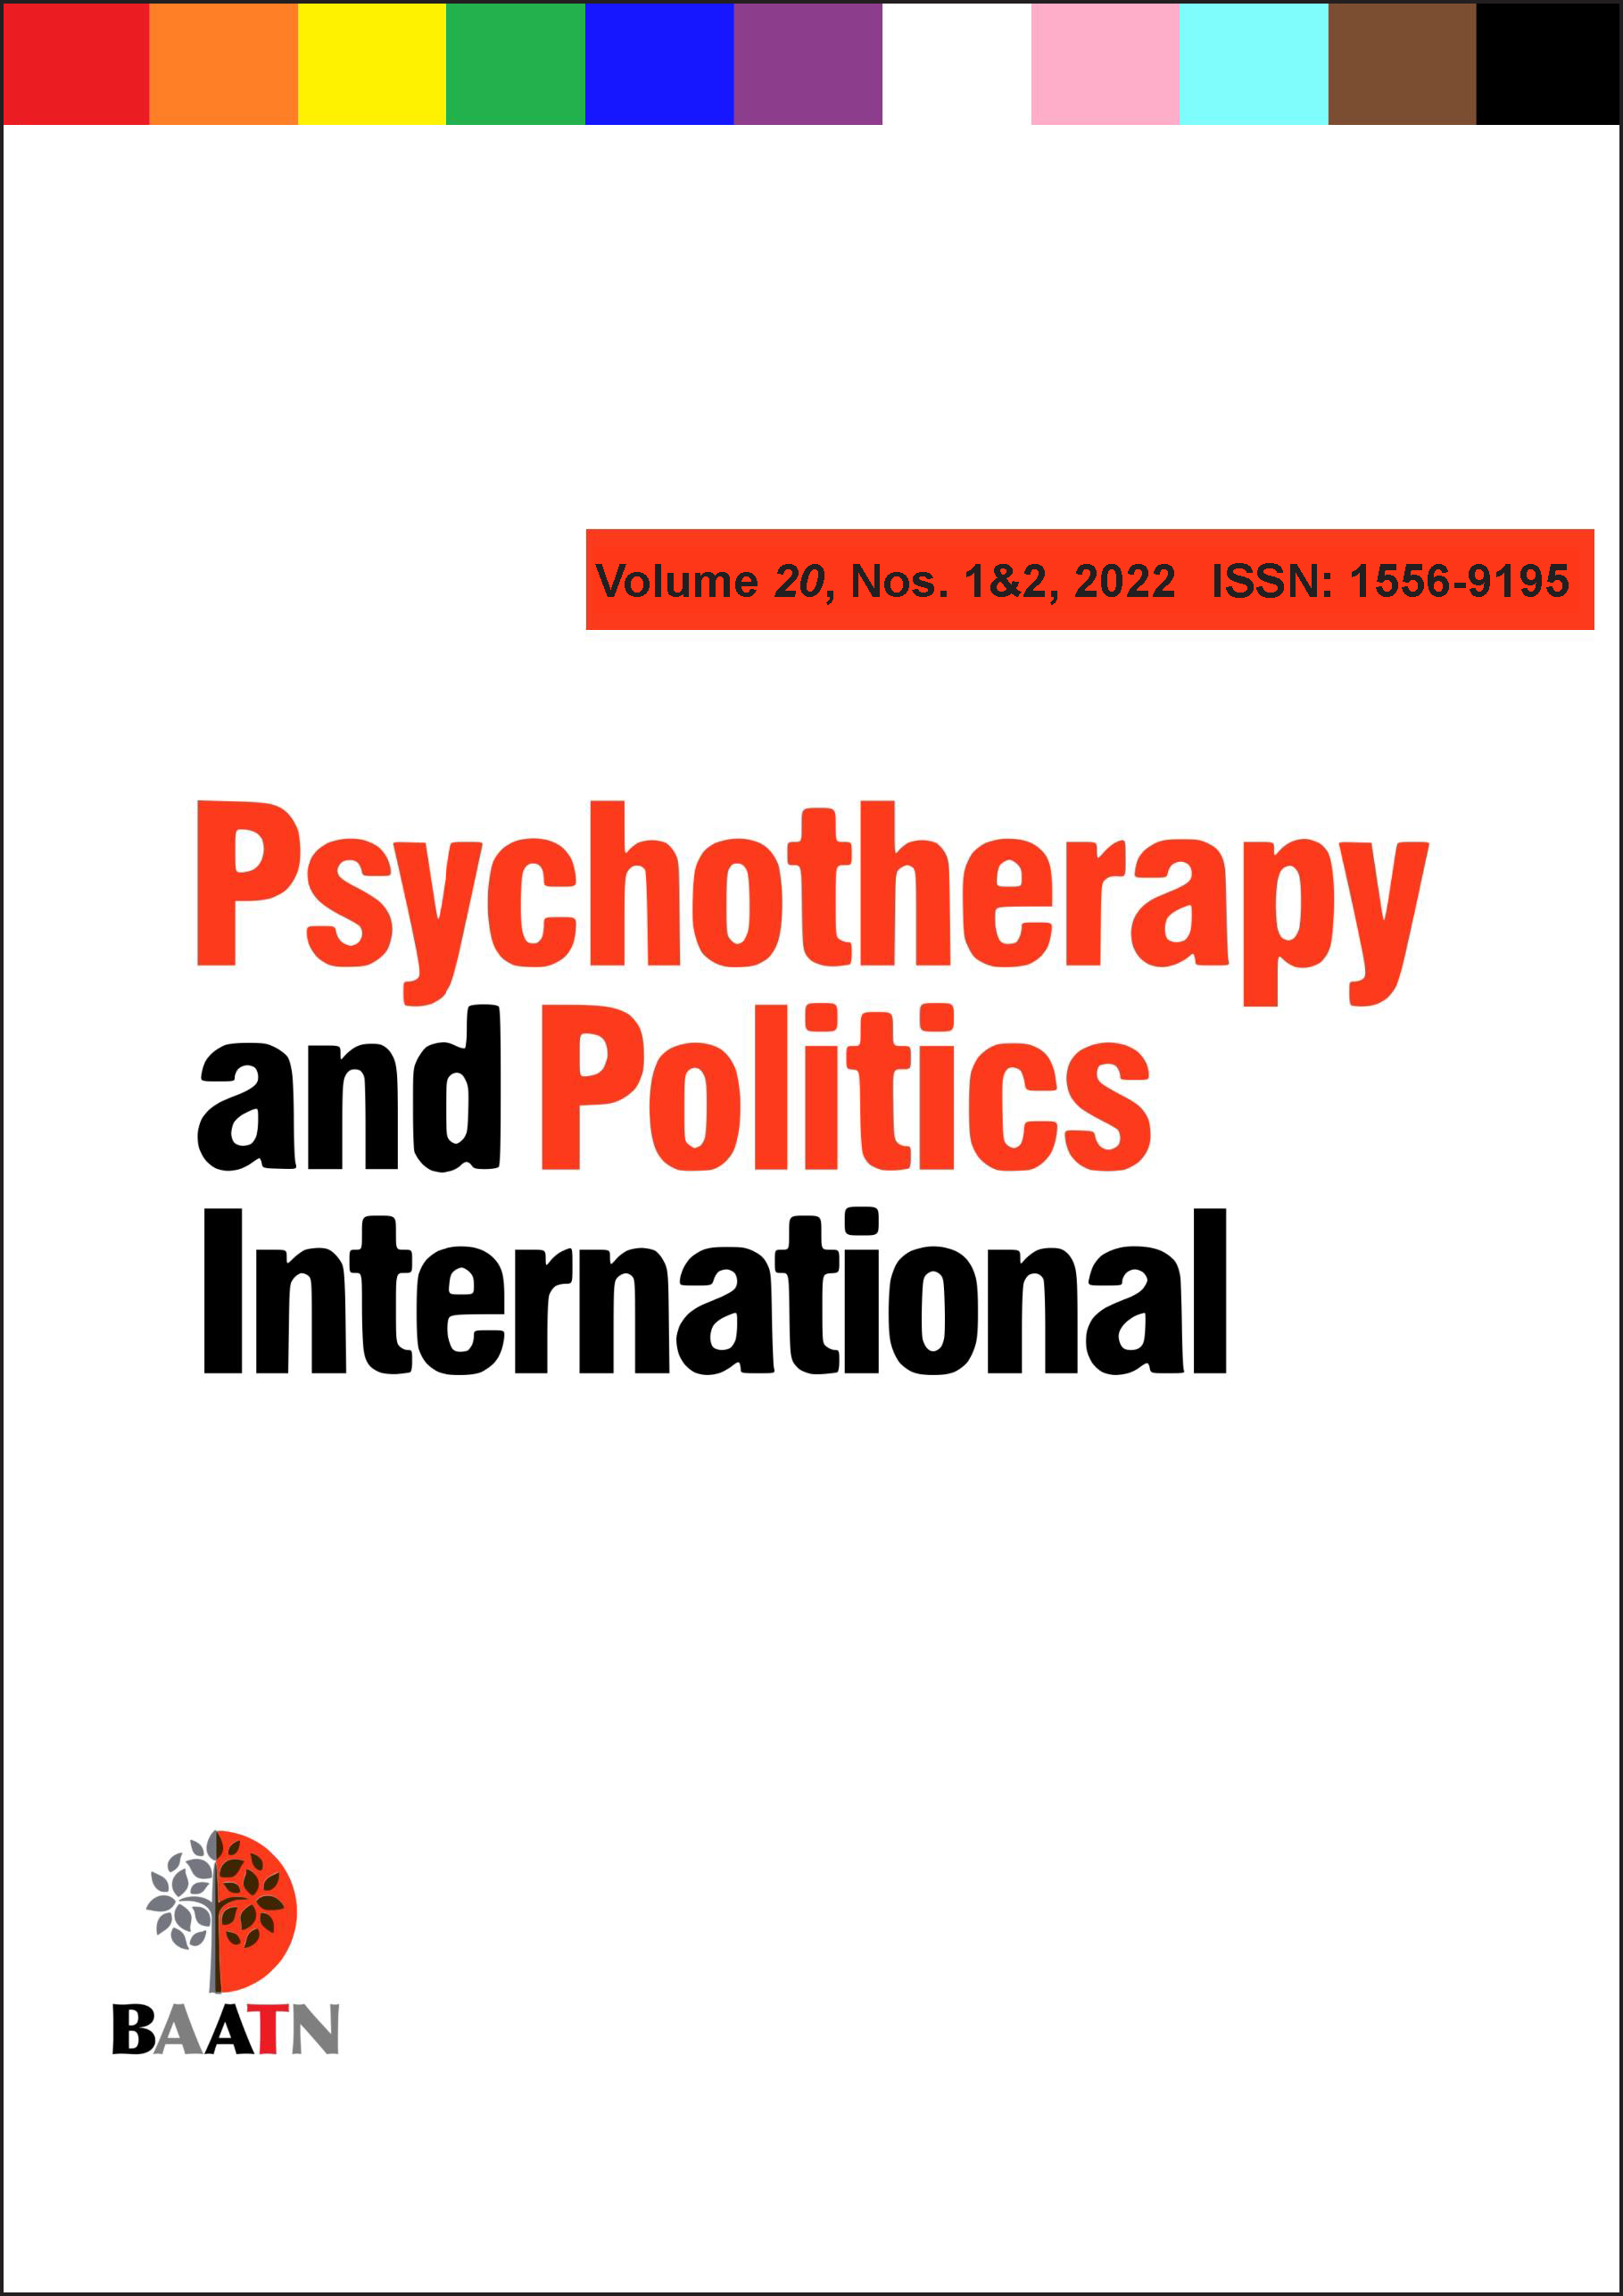 Psychotherapy and Politics International journal cover, volume 20, issue numbers 1 and 2, 2022, ISSN: 1556-9195